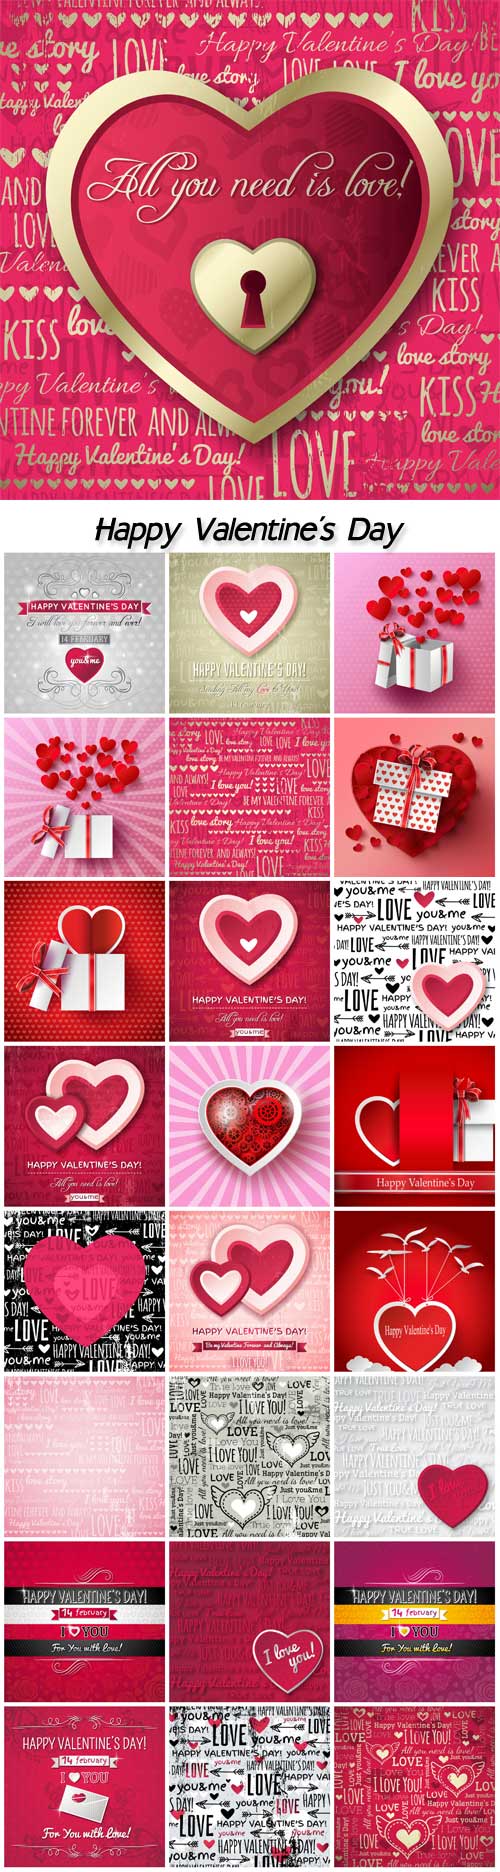 Happy Valentine's Day, hearts, gift wrap, backgrounds vector